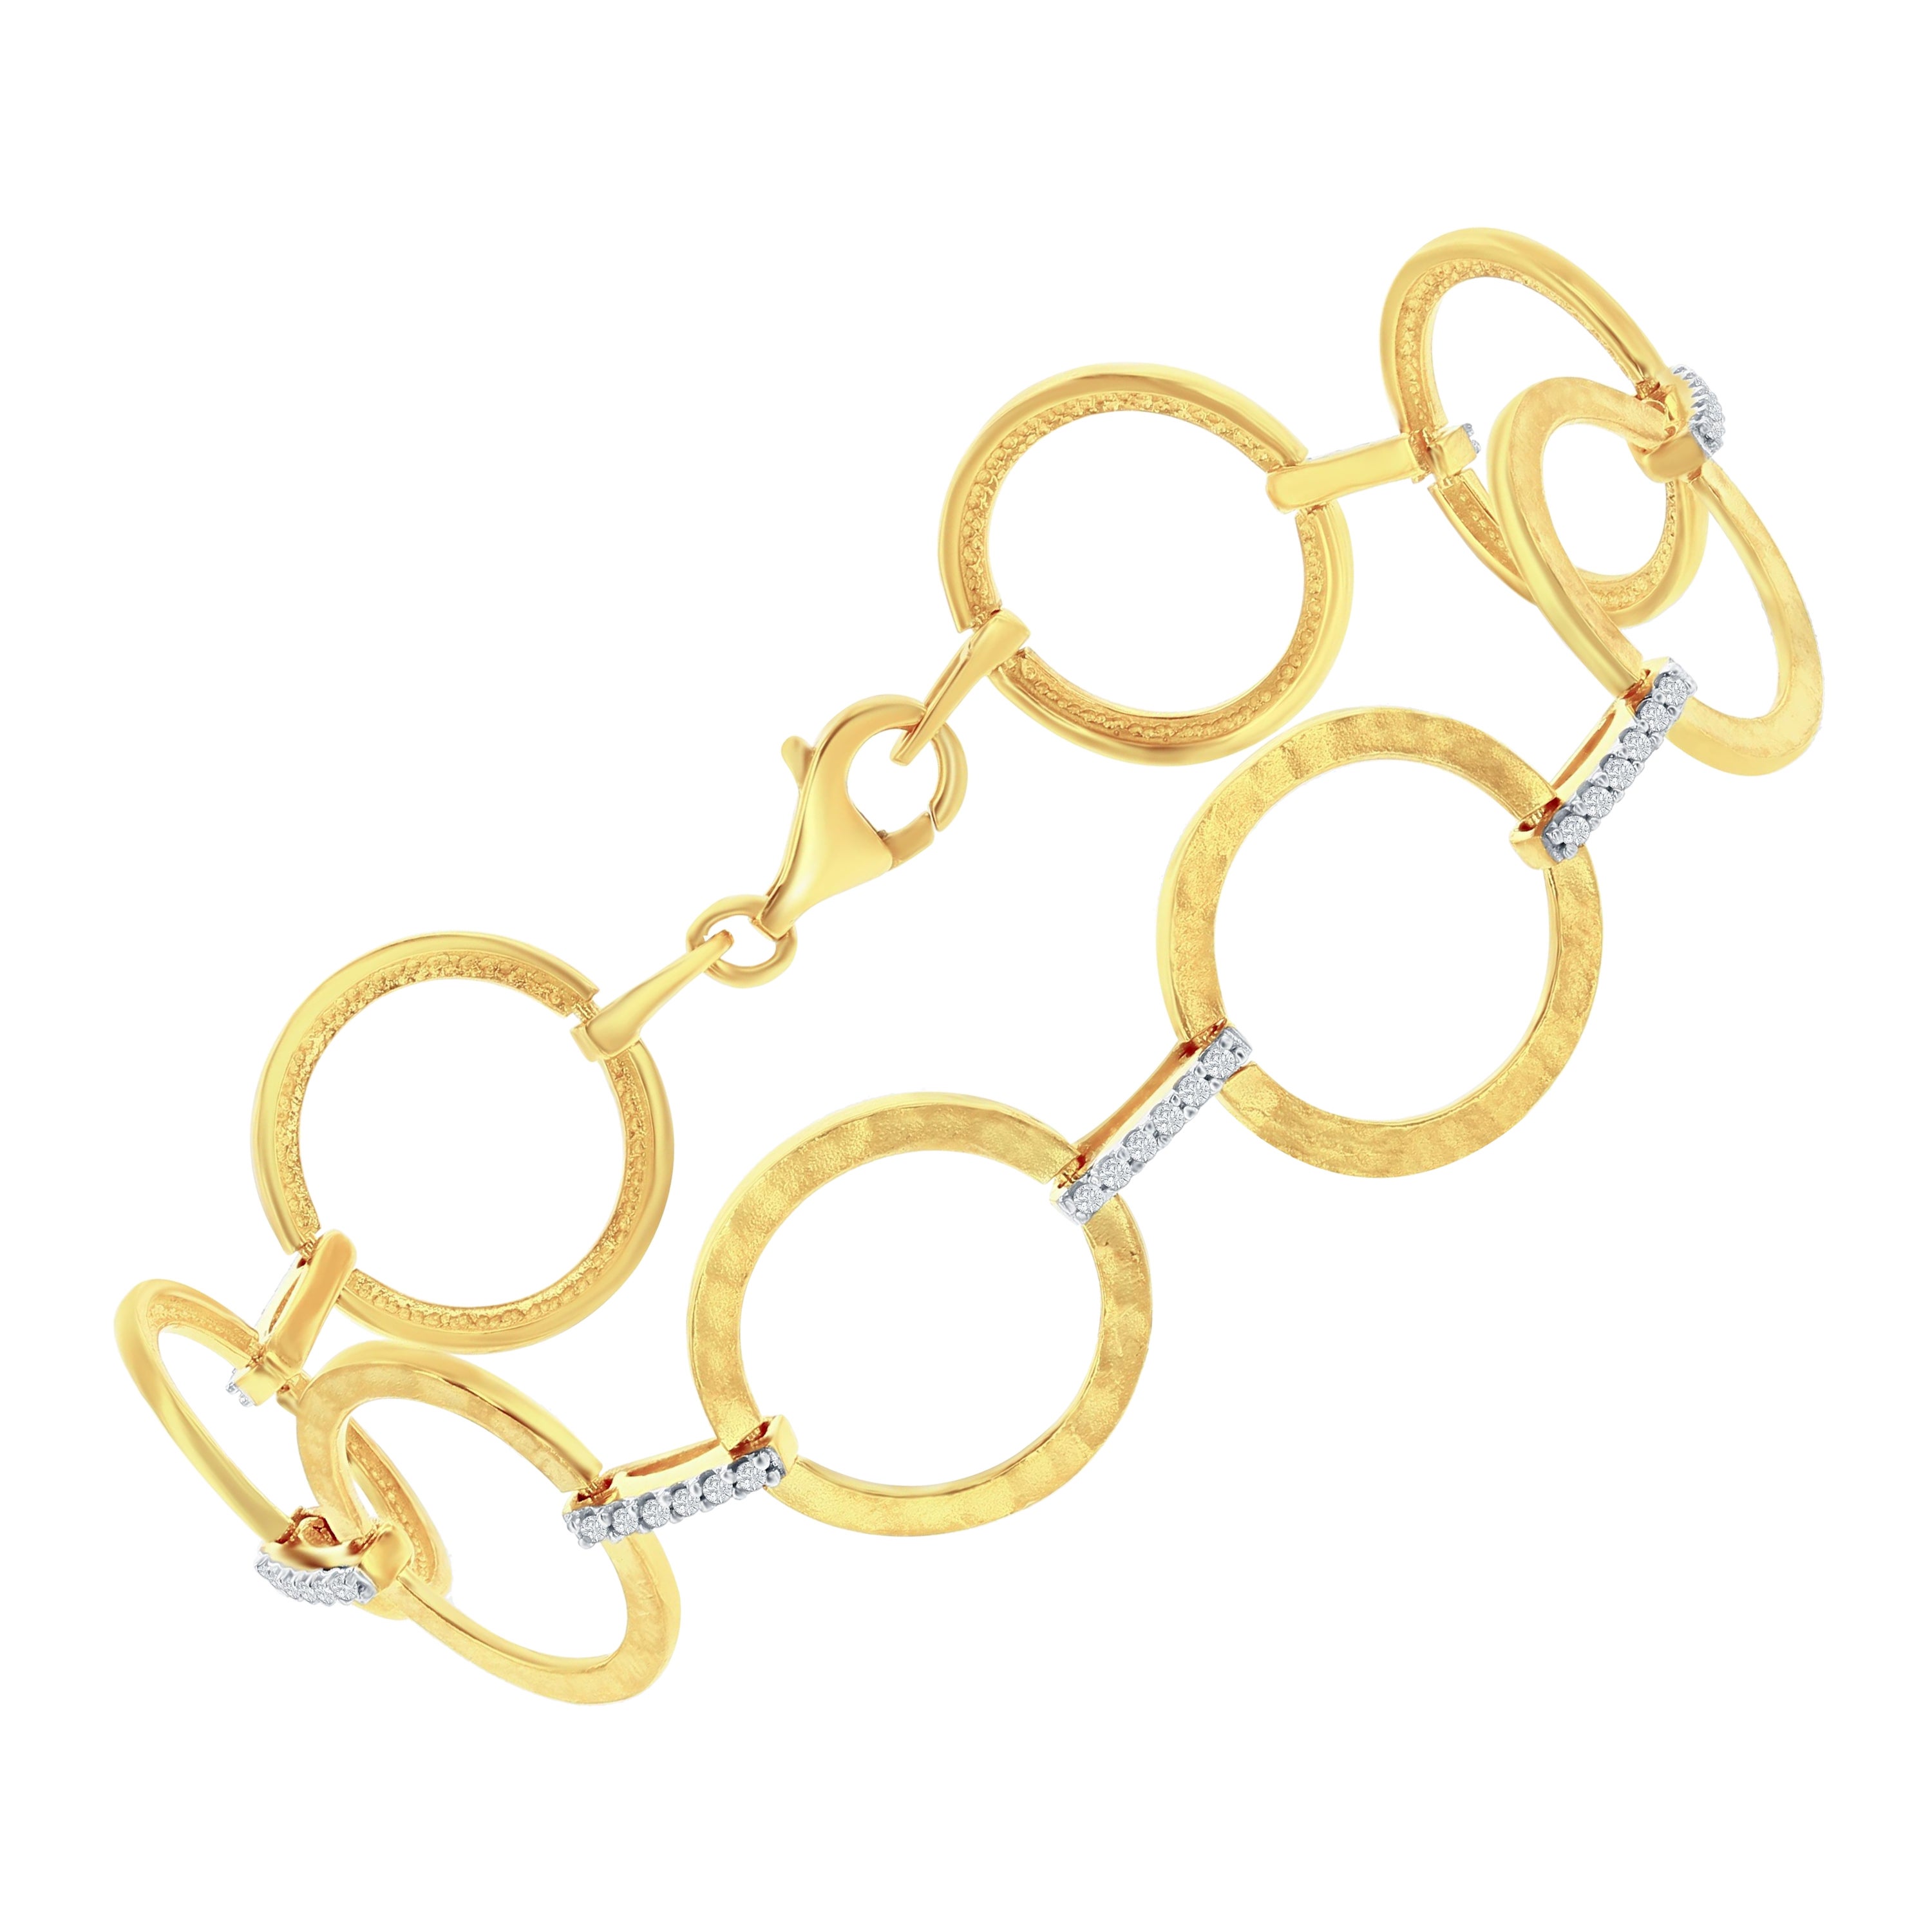 Hand-Crafted 14k Yellow Gold Open Circle Link Bracelet For Sale